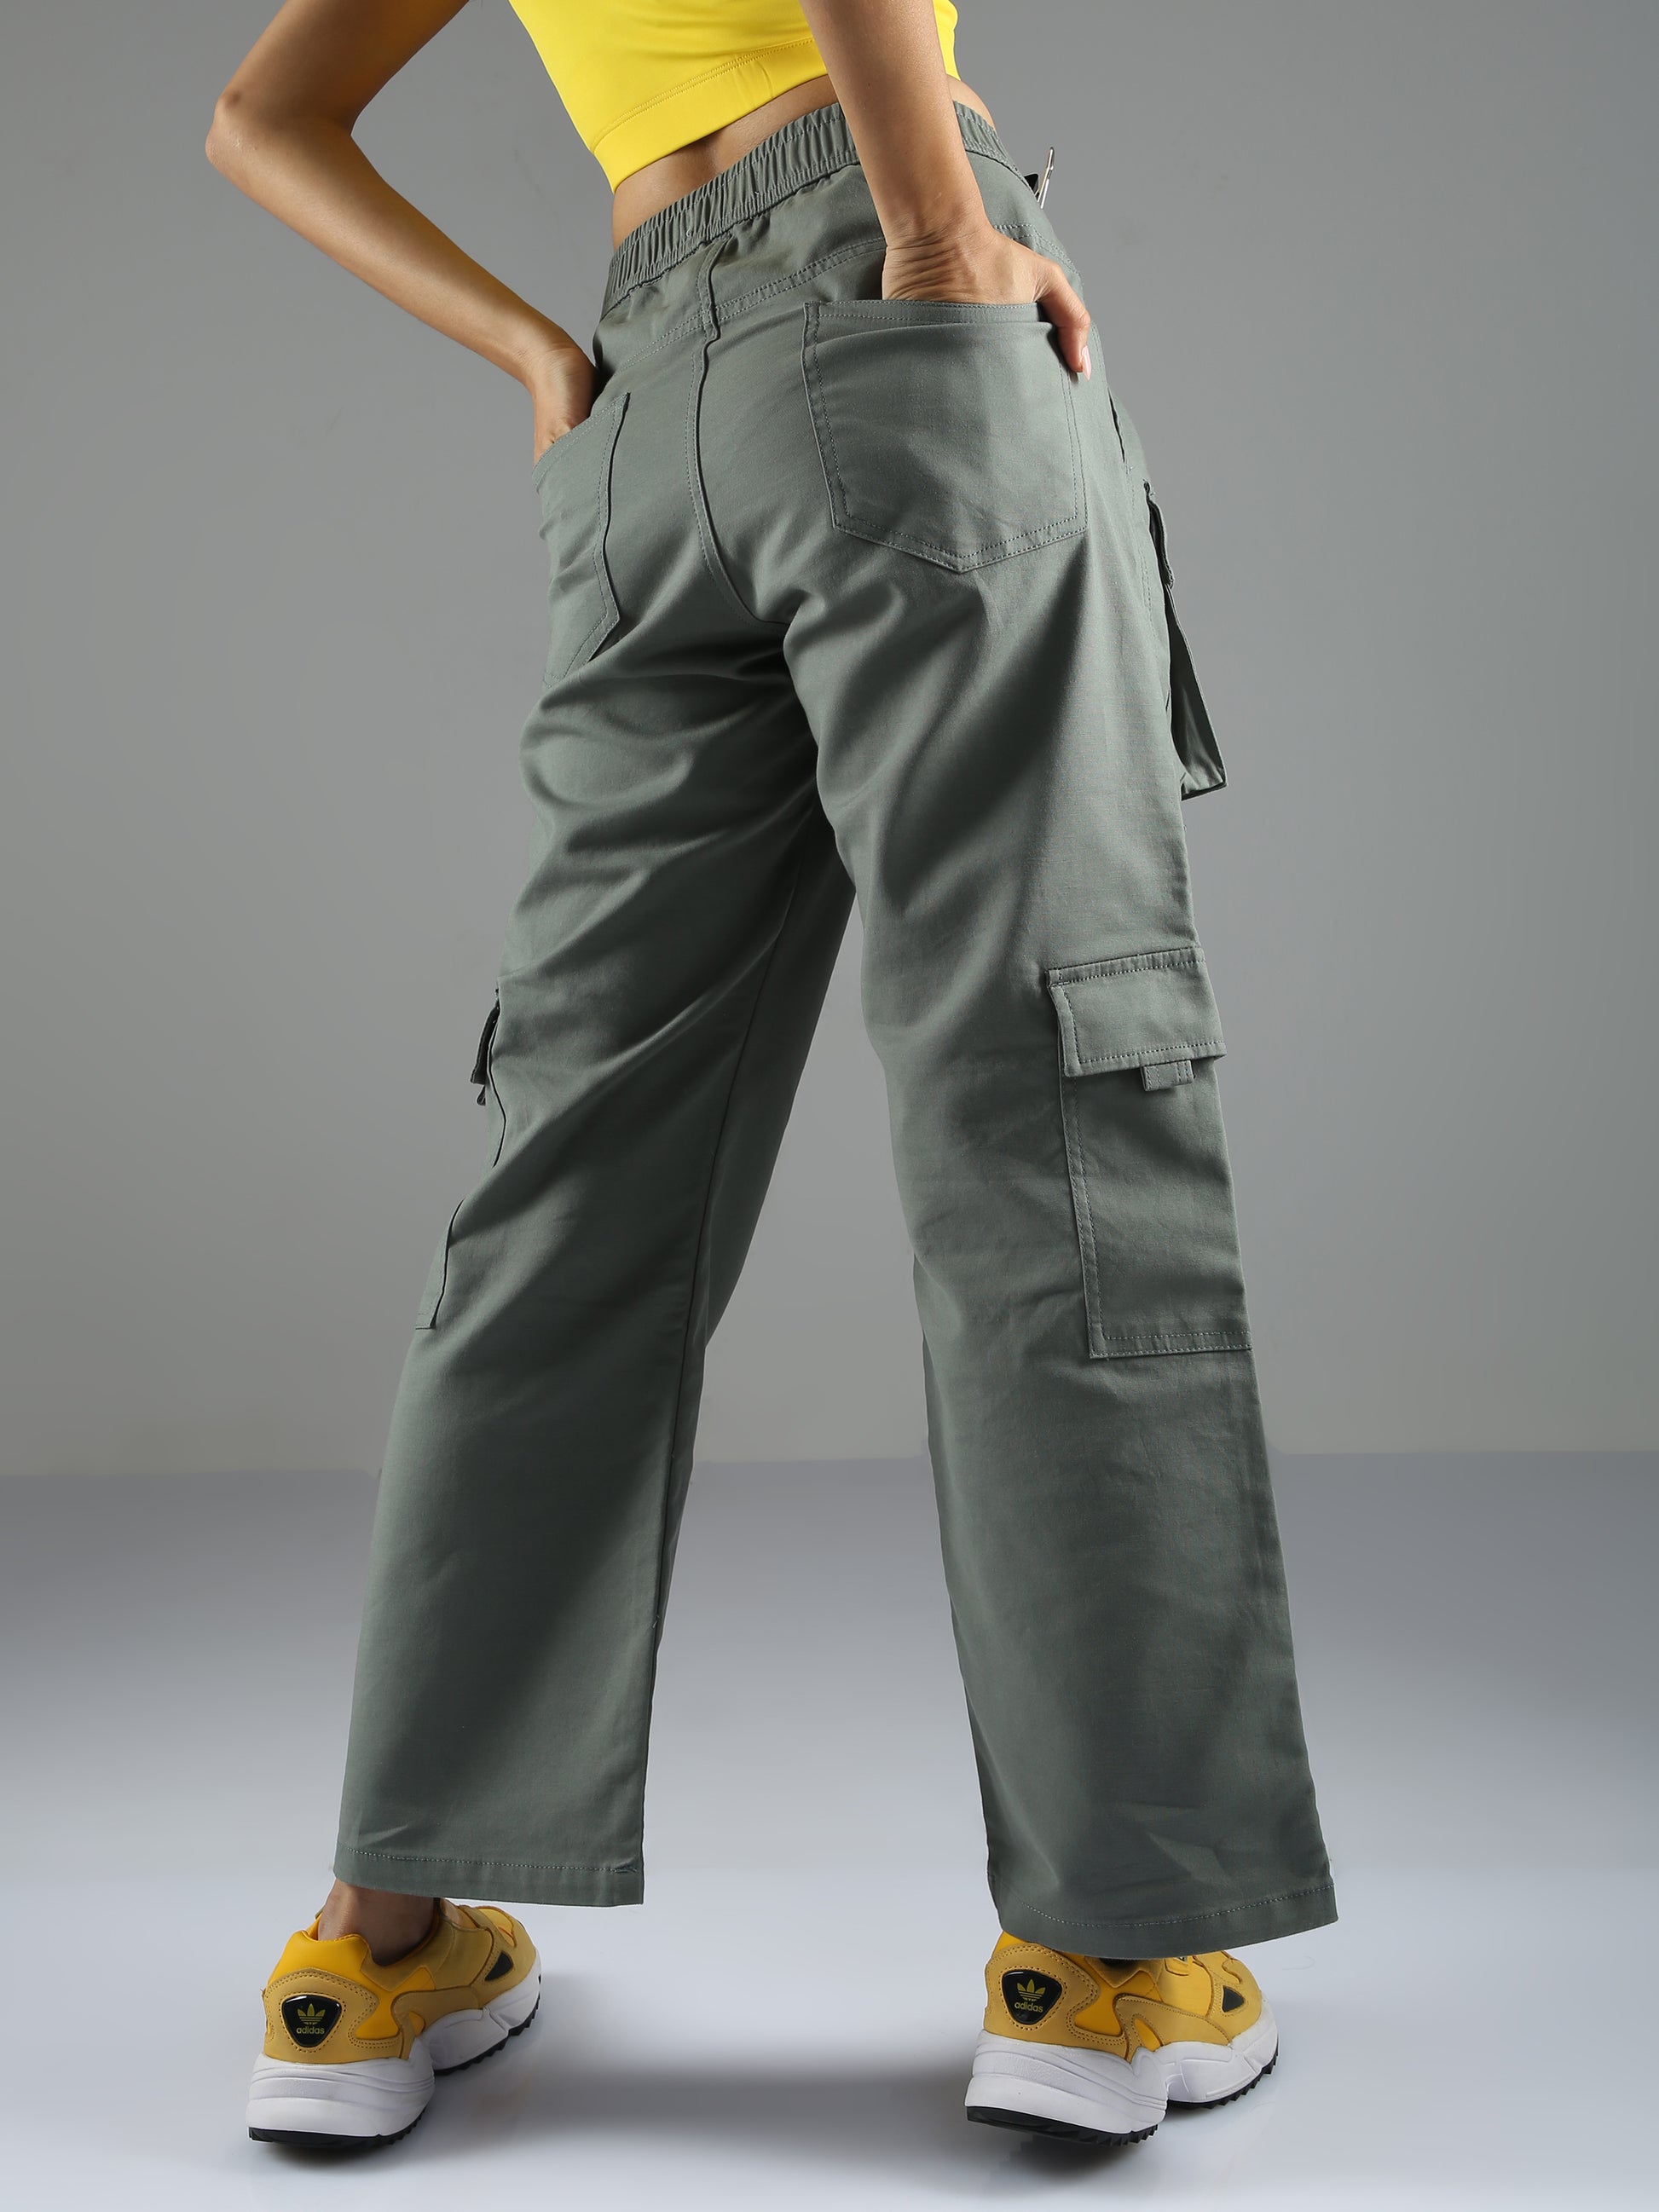 Baggy Olive Green Cargo Pants Womens